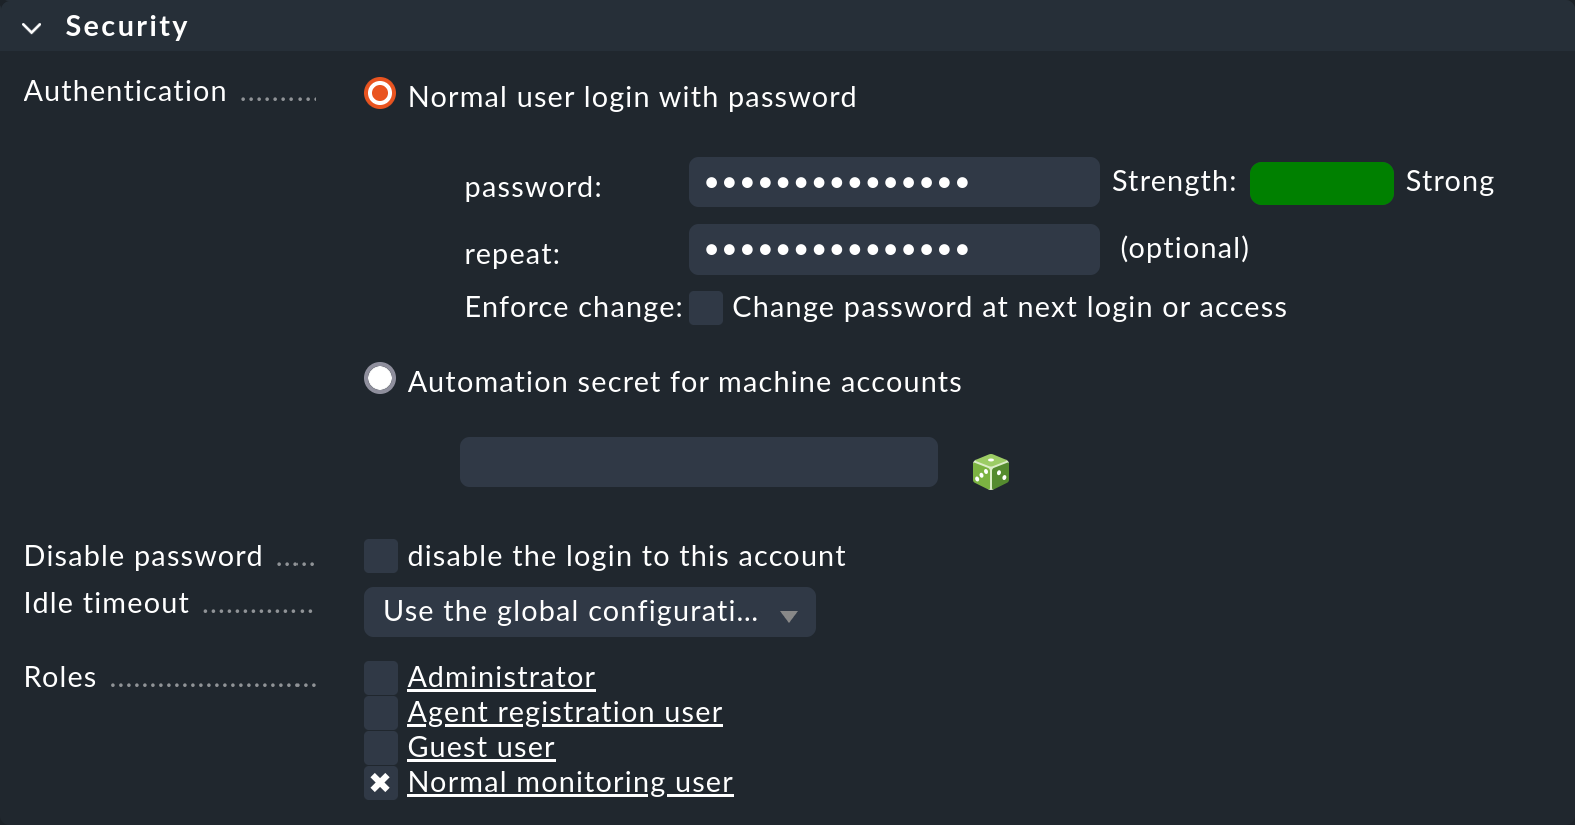 Dialog for defining the security settings for the new user.